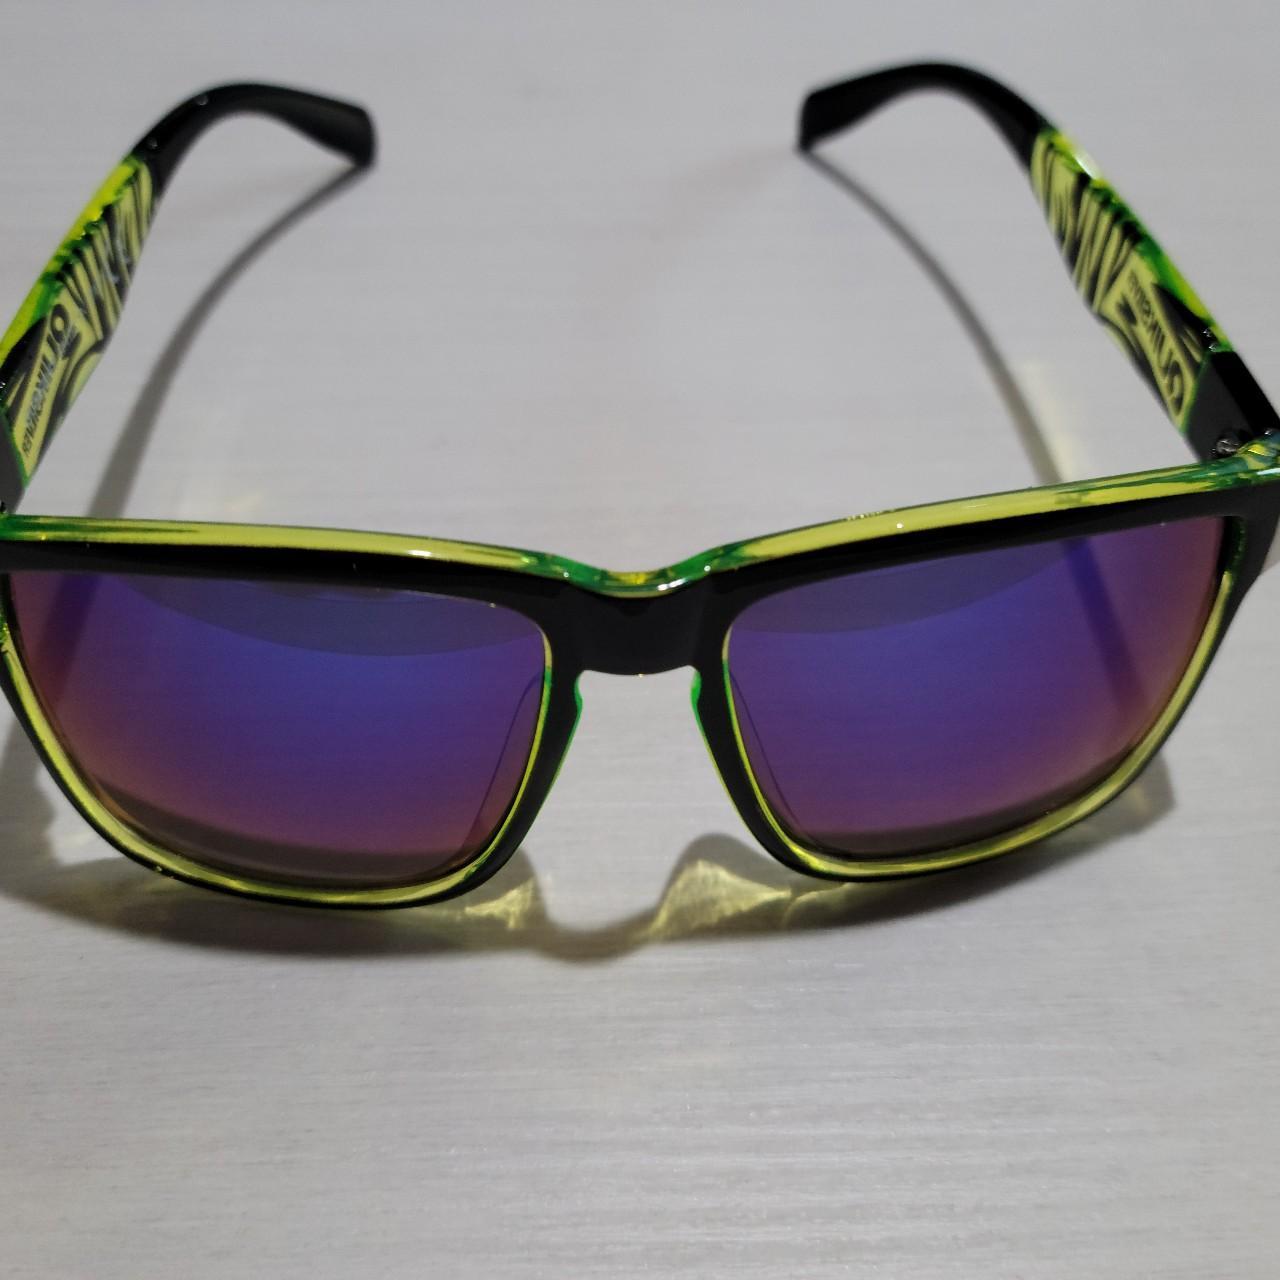 New polarized quiksilver sunglasses, green and black... - Depop